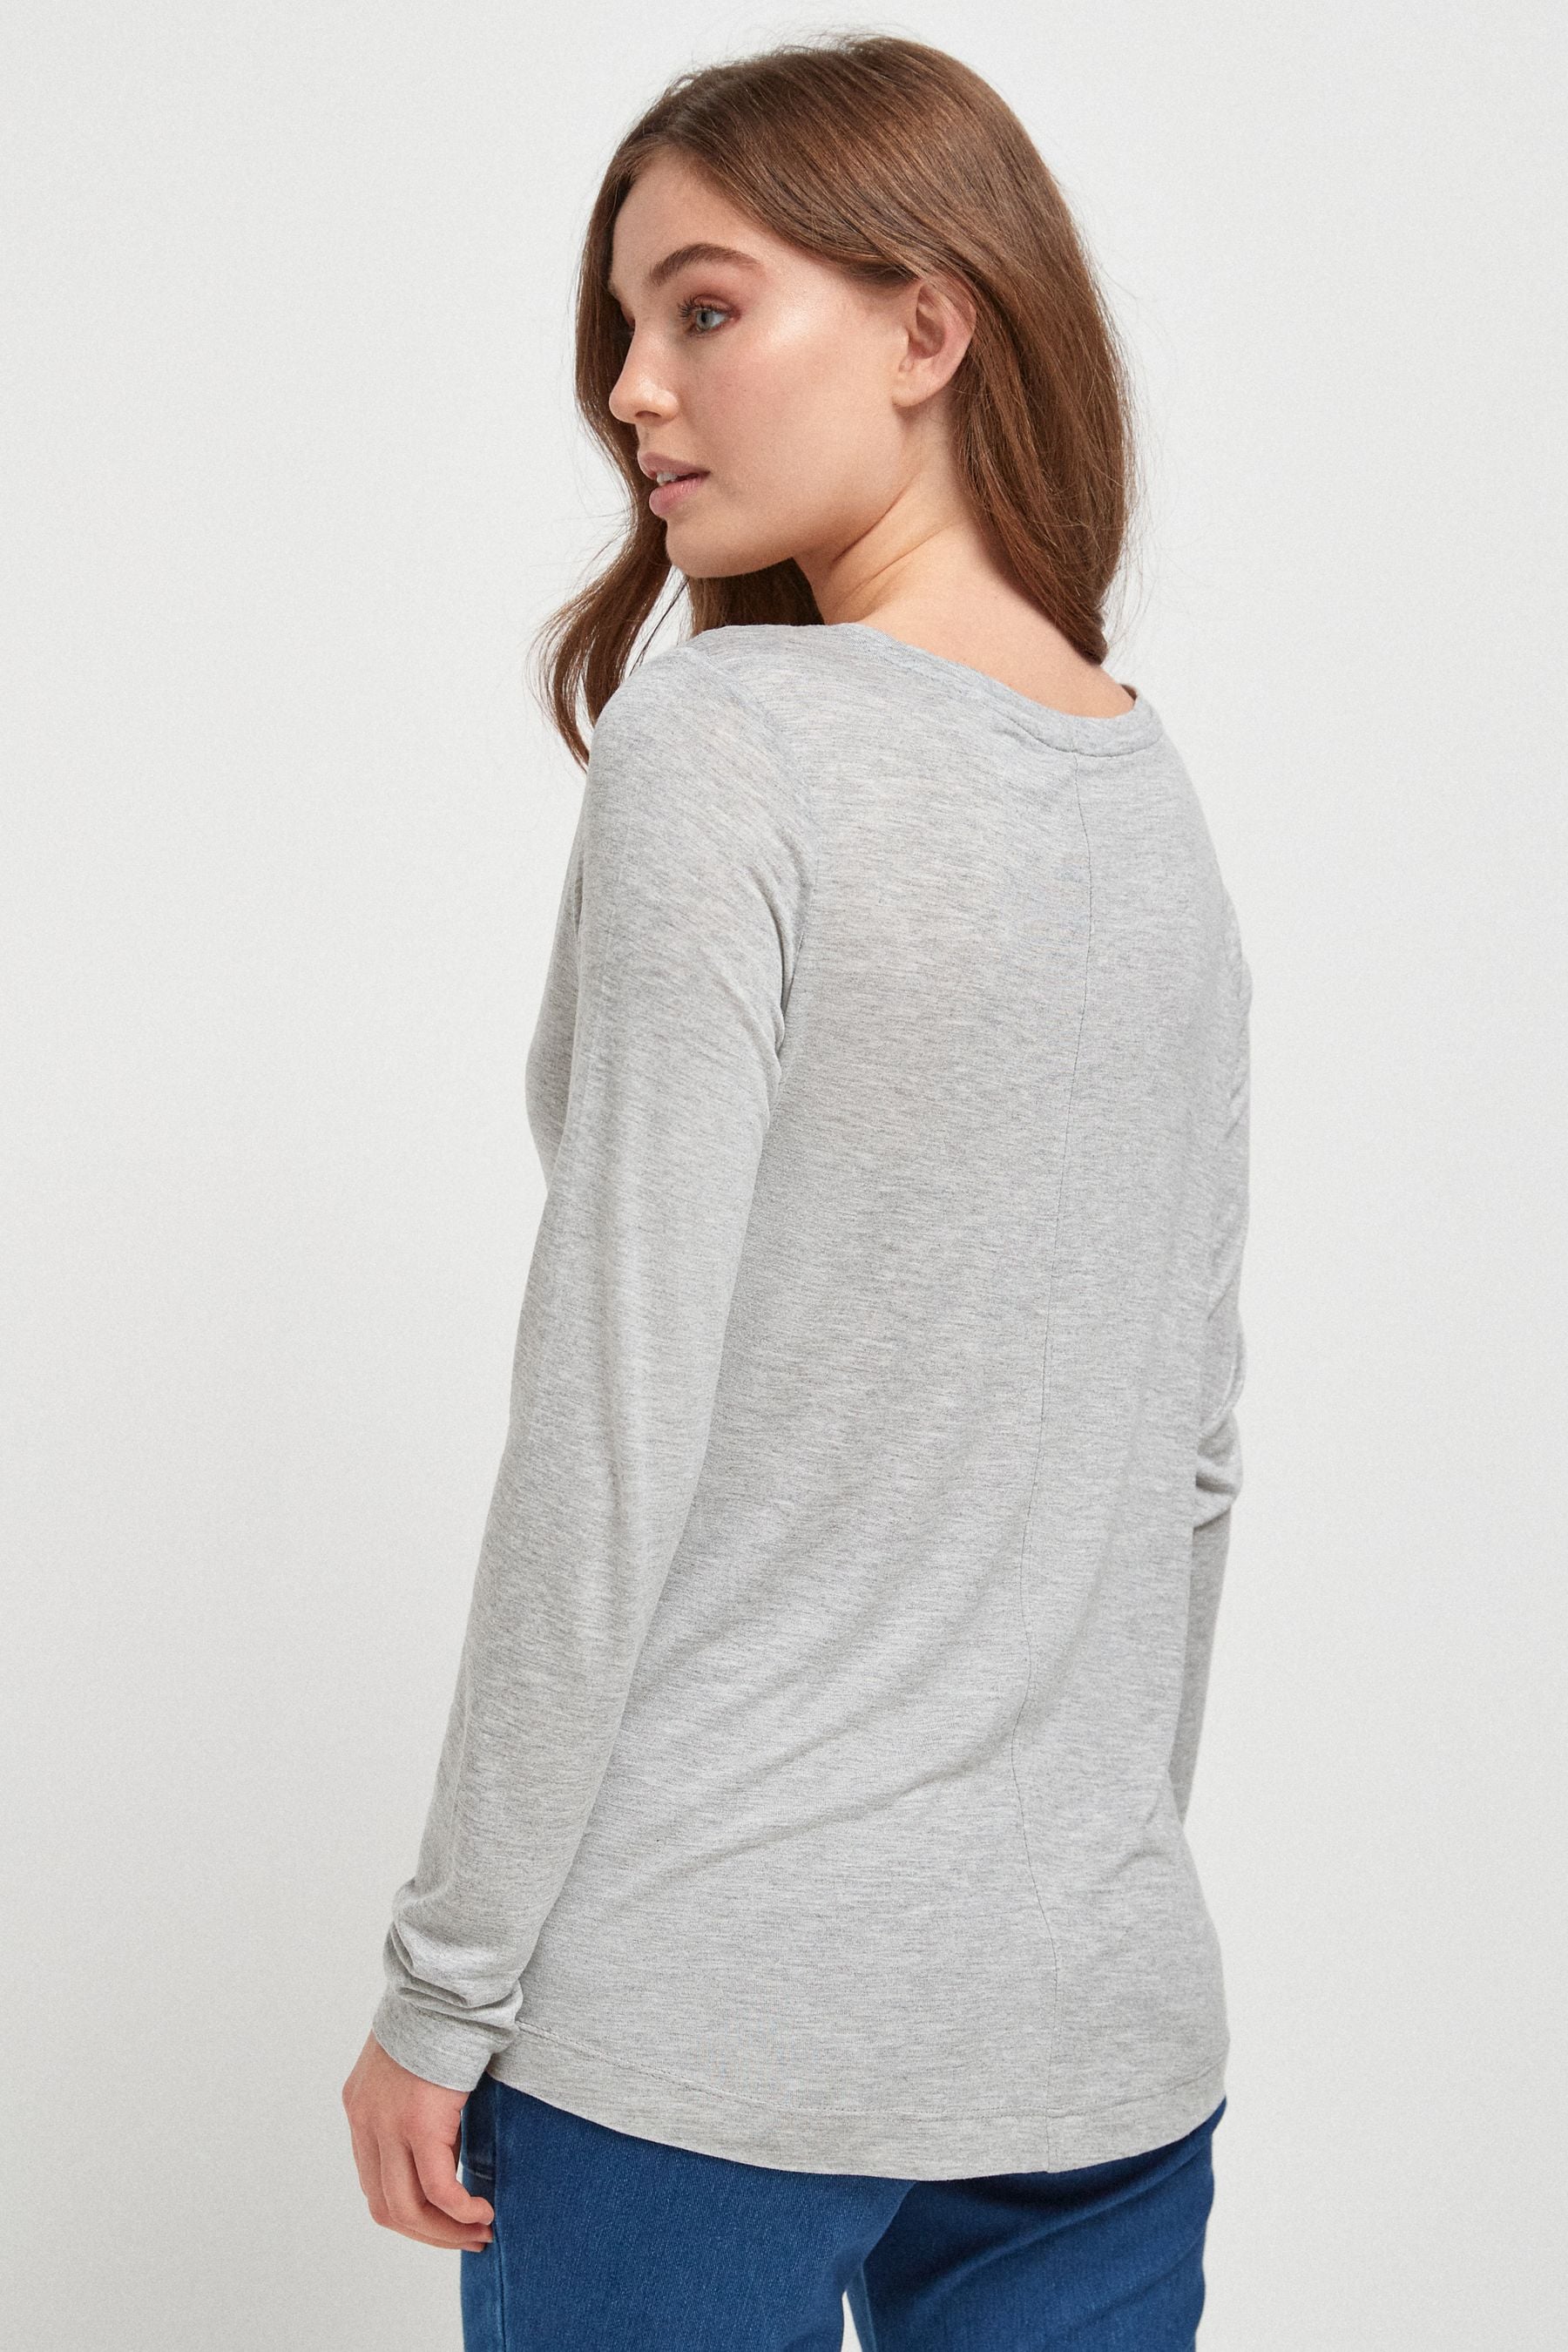 Buy Slouch V-Neck Long Sleeve T-Shirt from the Next UK online shop